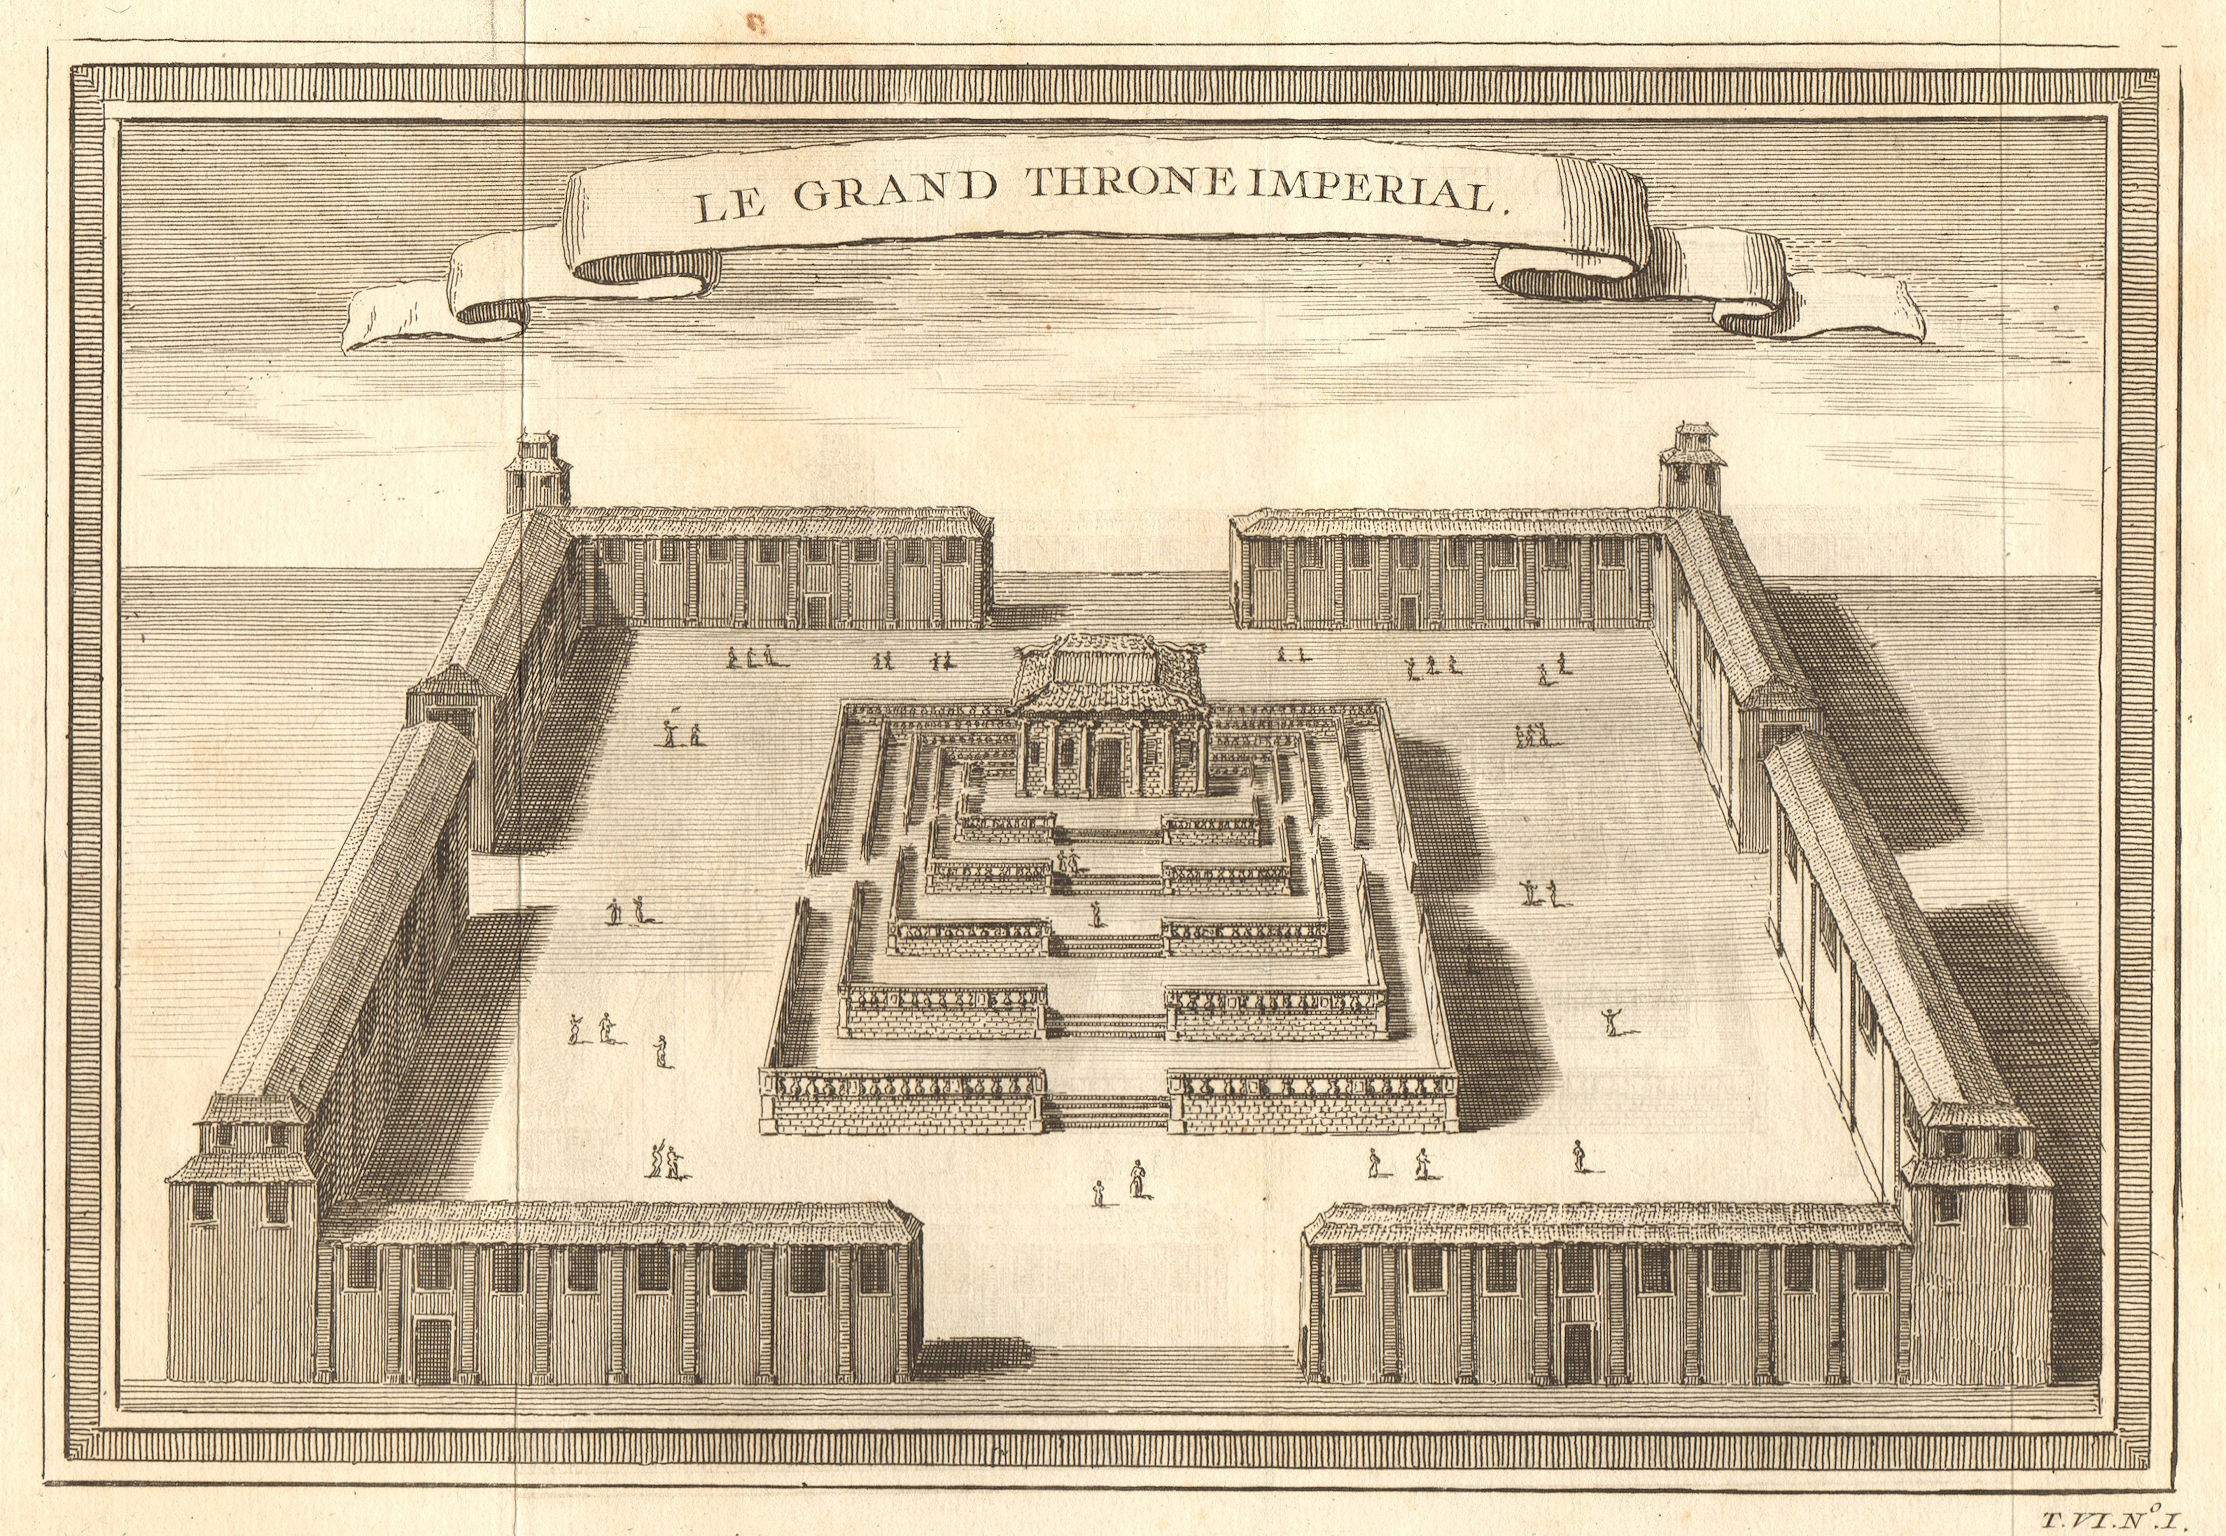 'Le Grand Throne Imperial'. The Forbidden City, Beijing, China 1748 old print